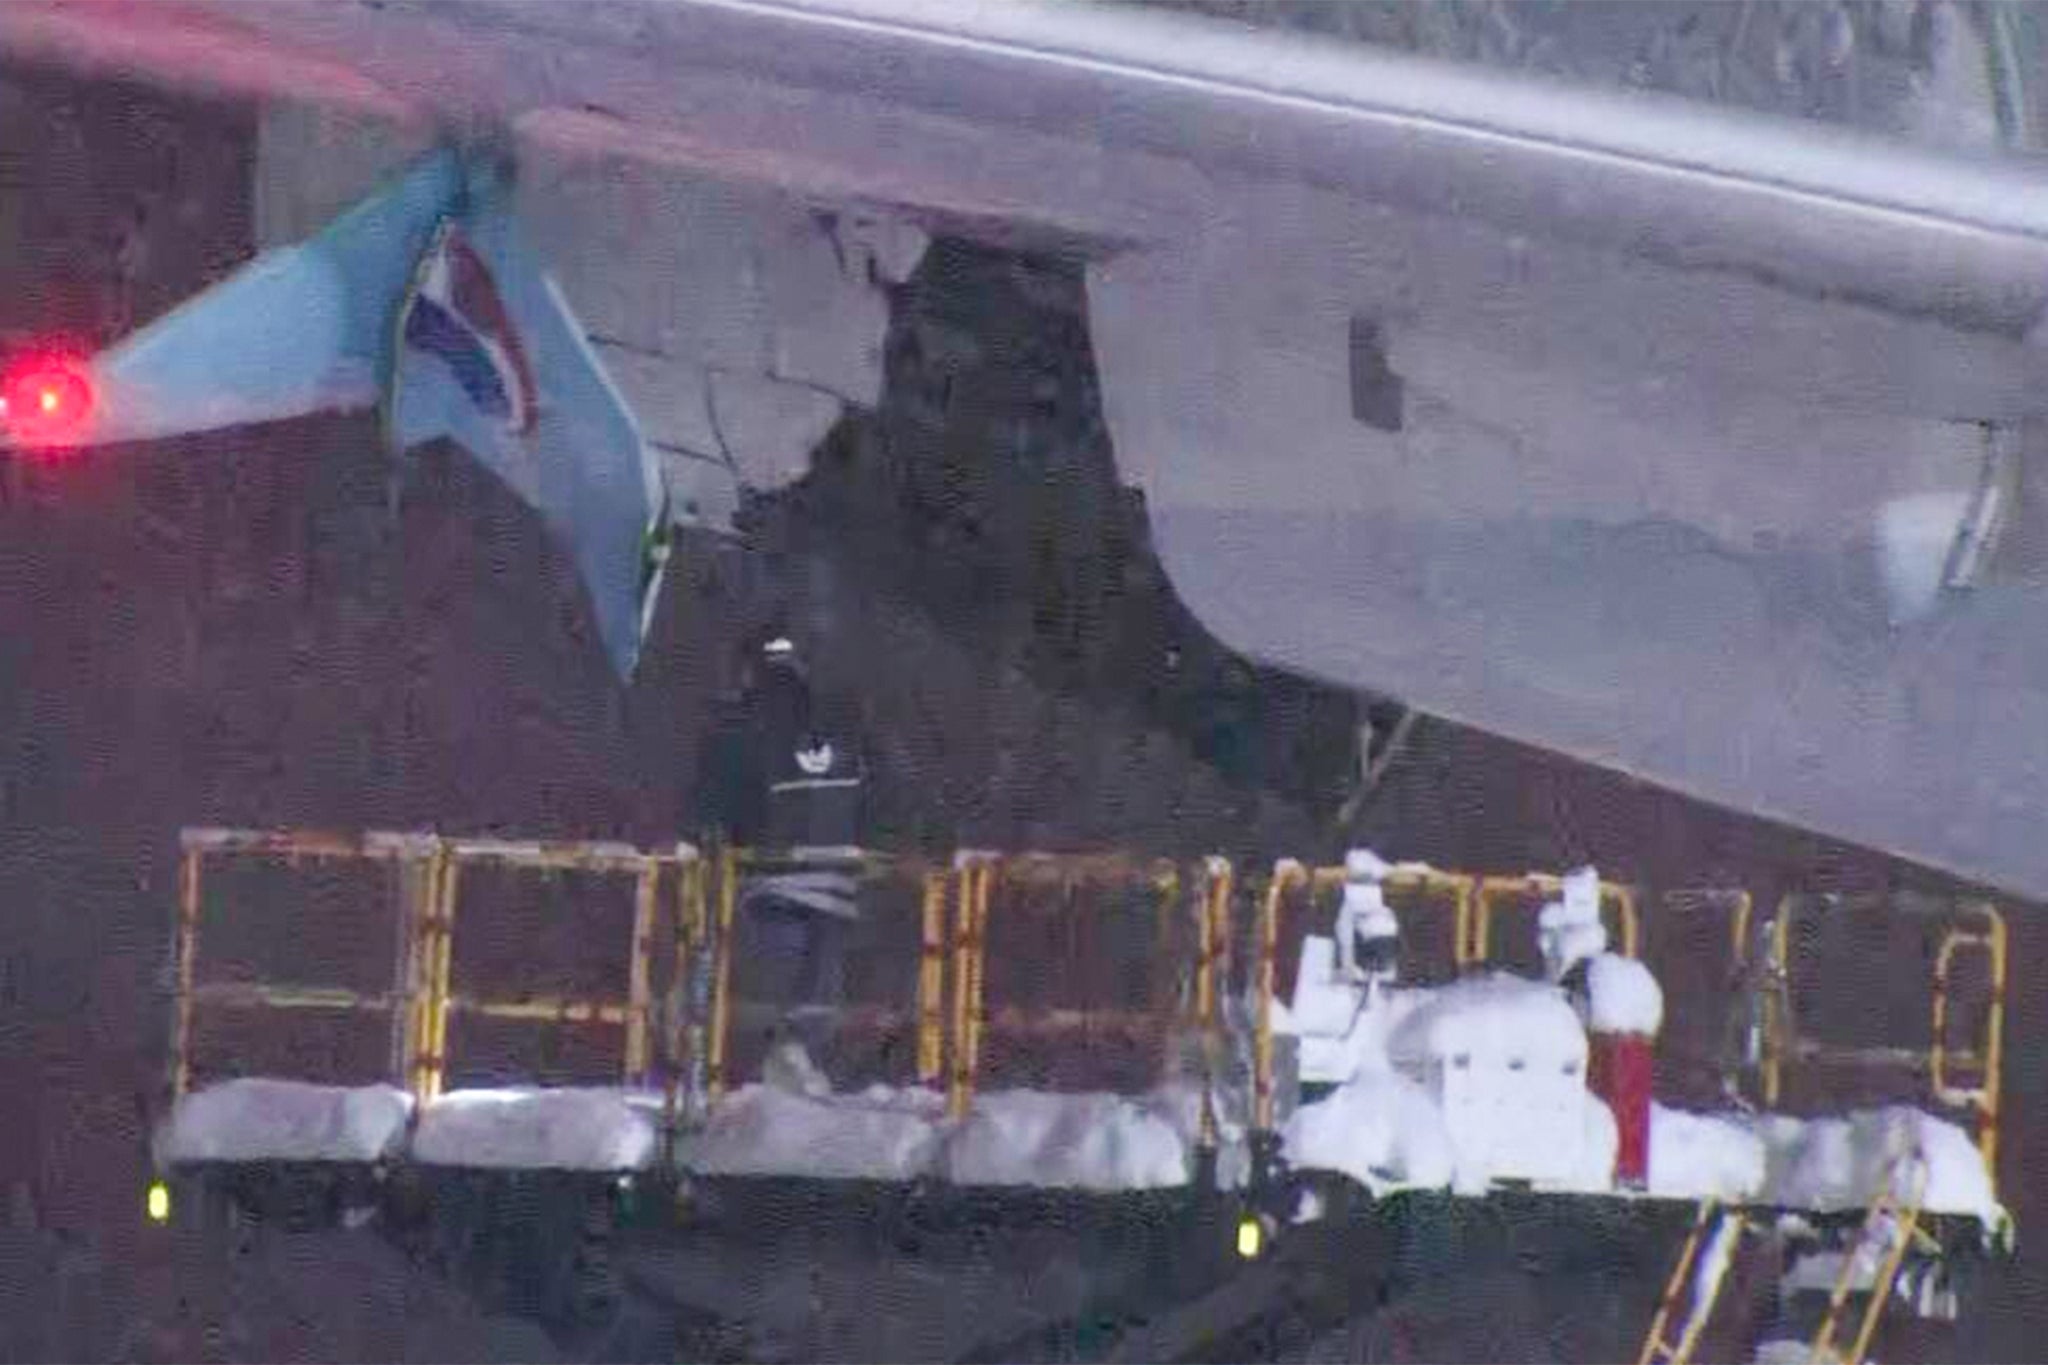 Two planes collide on runway in second Japan airport crash | The Independent